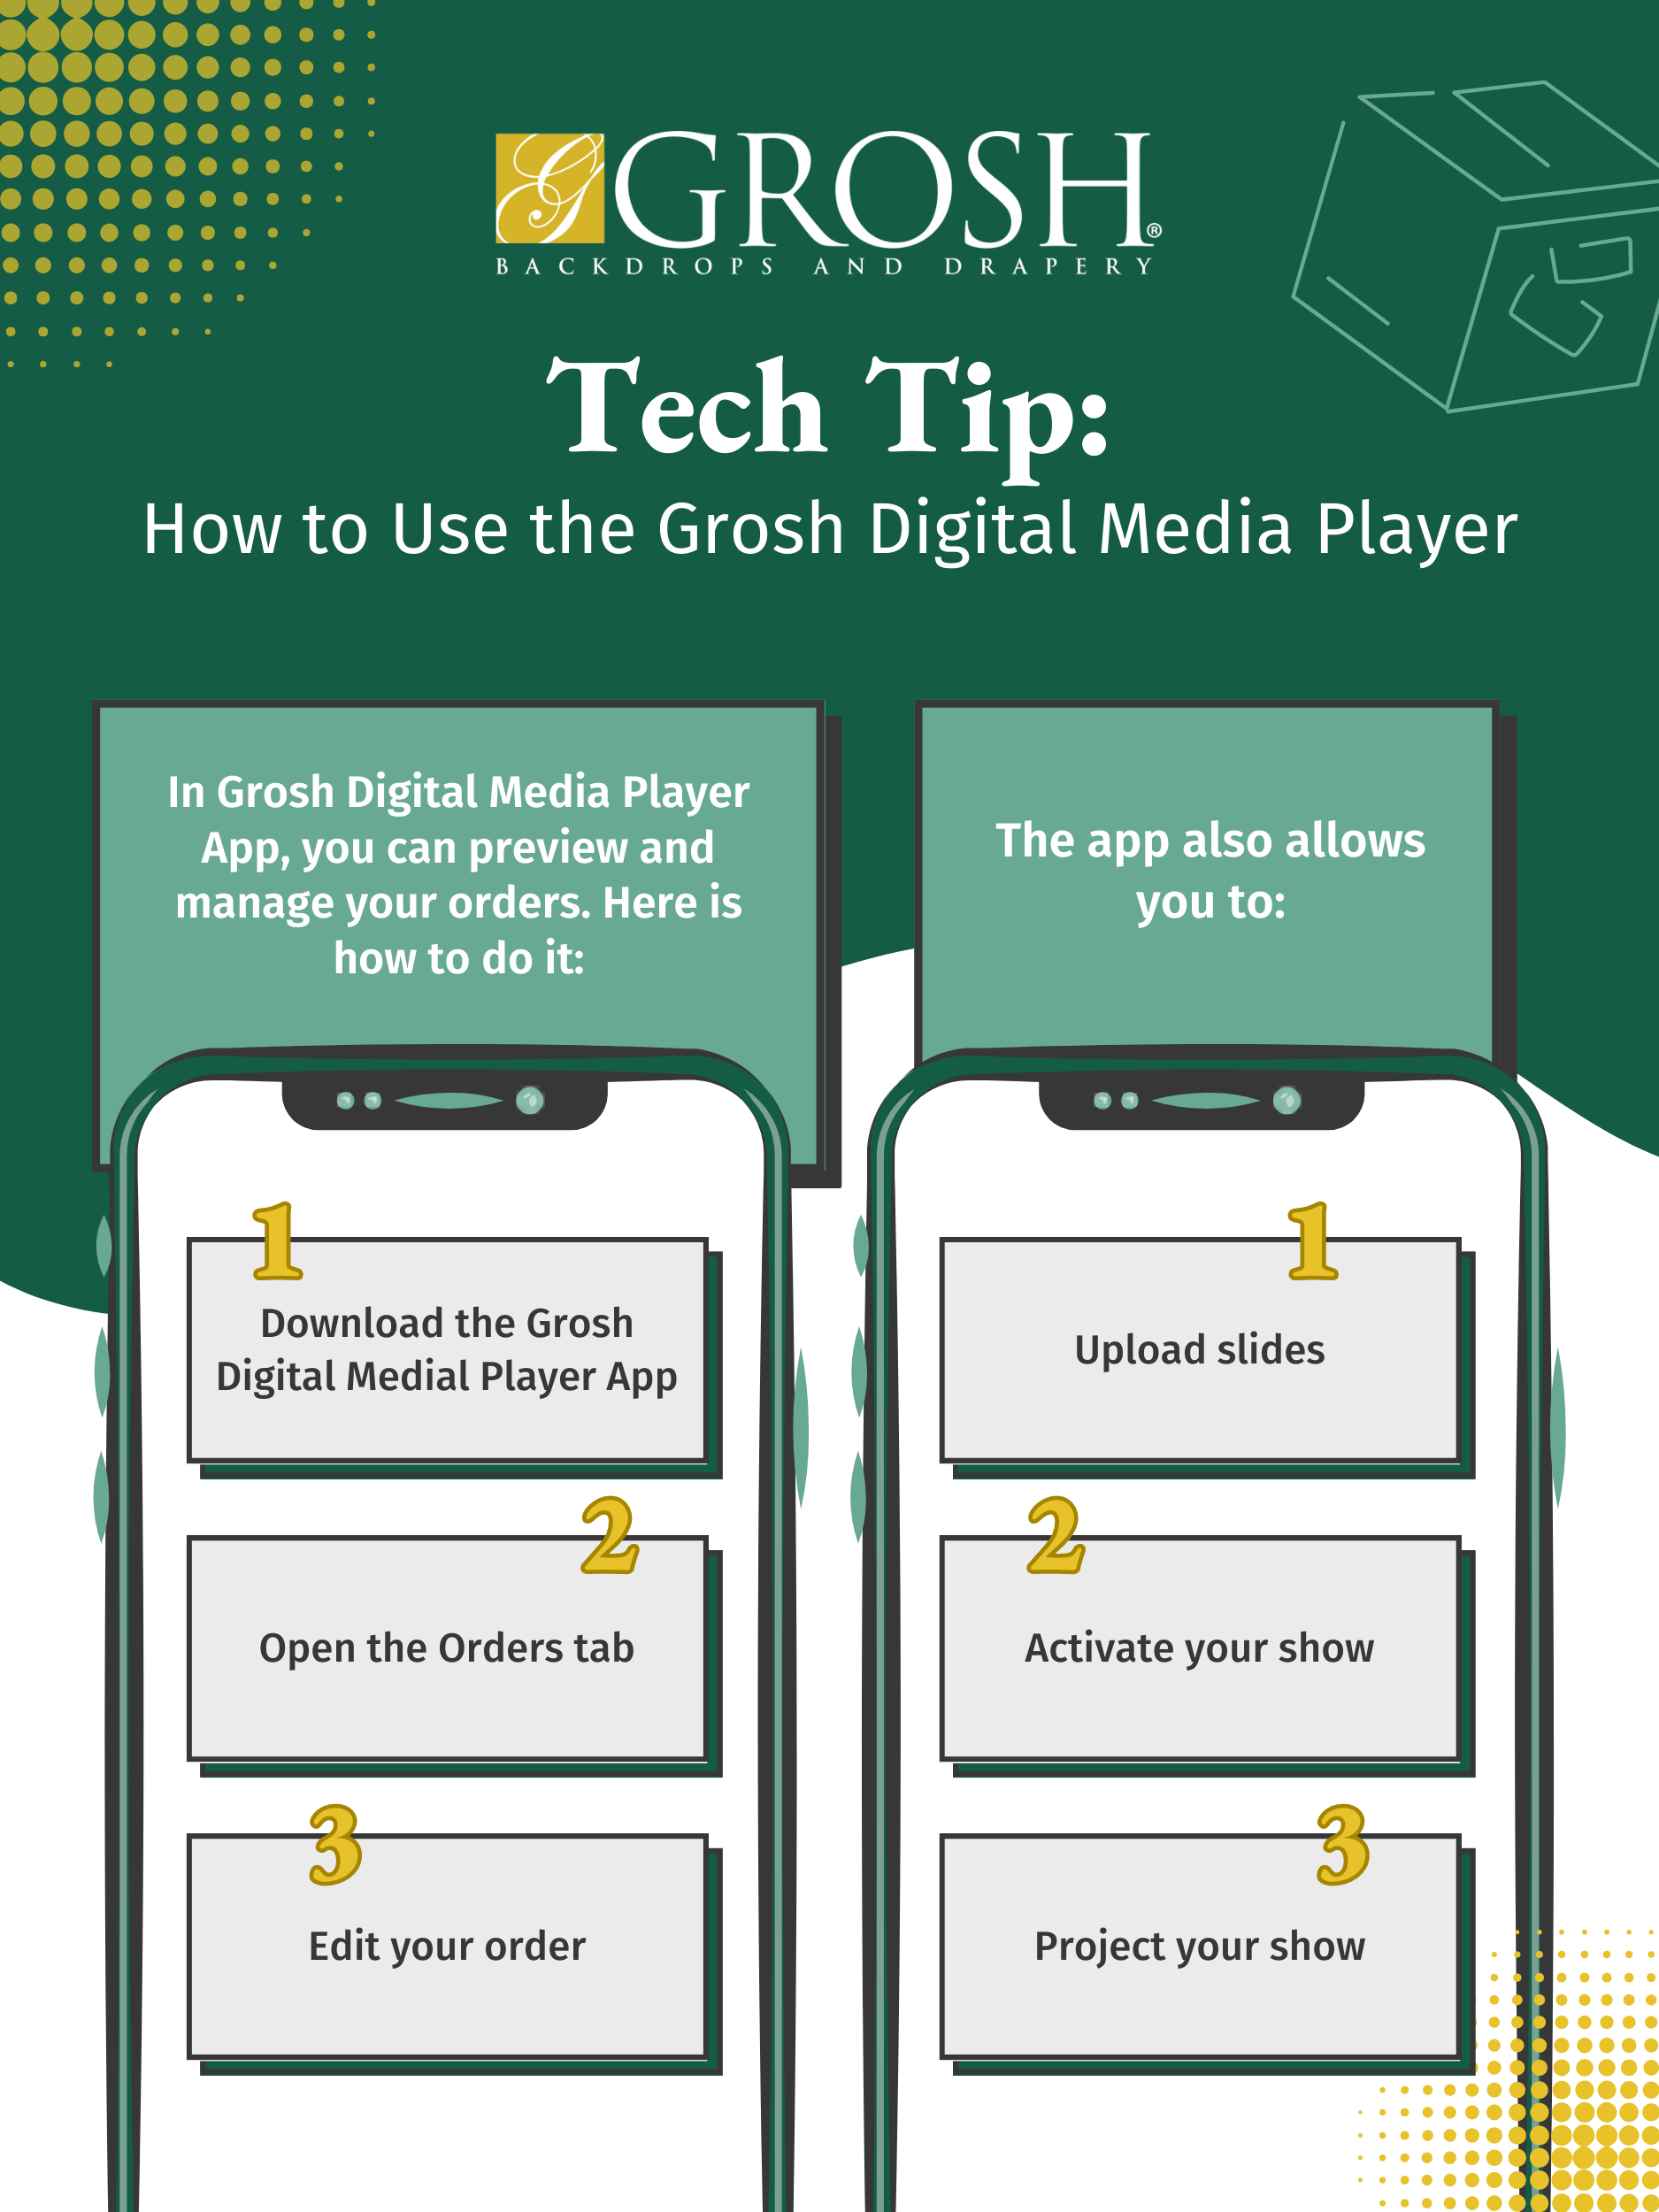 Tech Tip How to Use the Grosh Digital Media Player